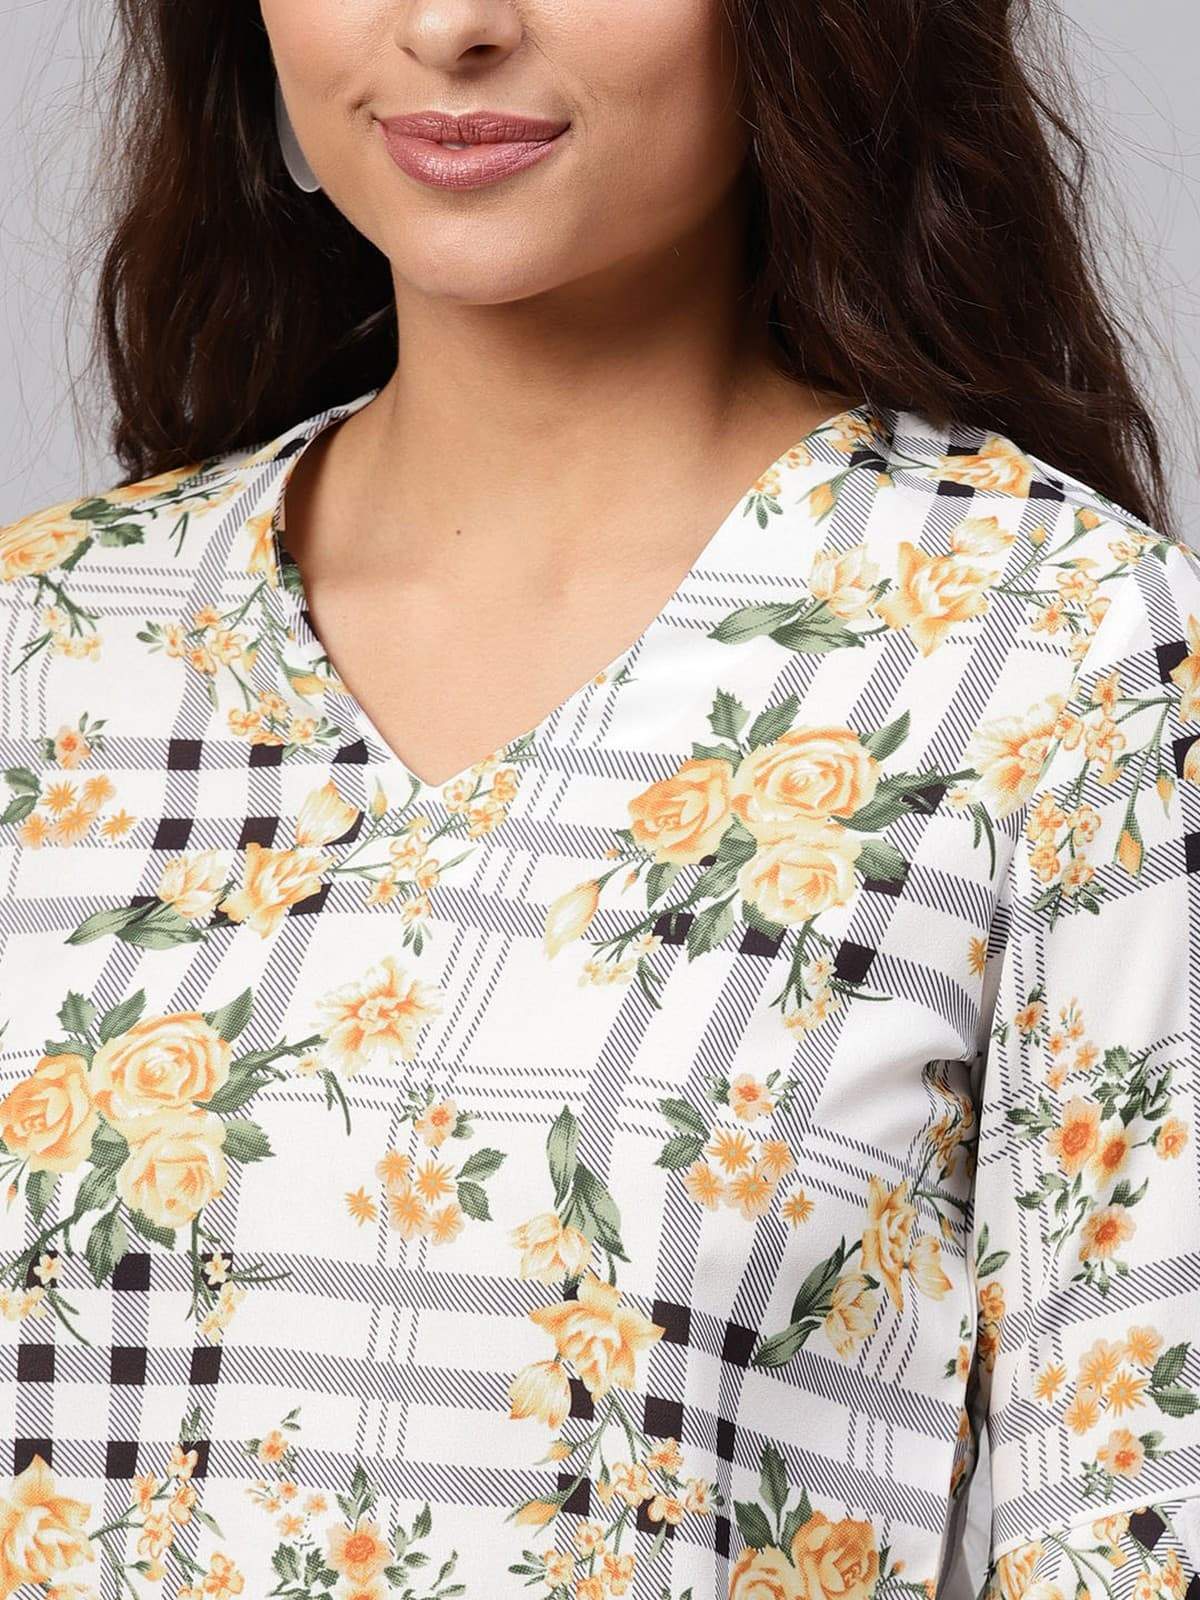 Women's Floral Stripes Printed Flare Sleeves Top - Pannkh